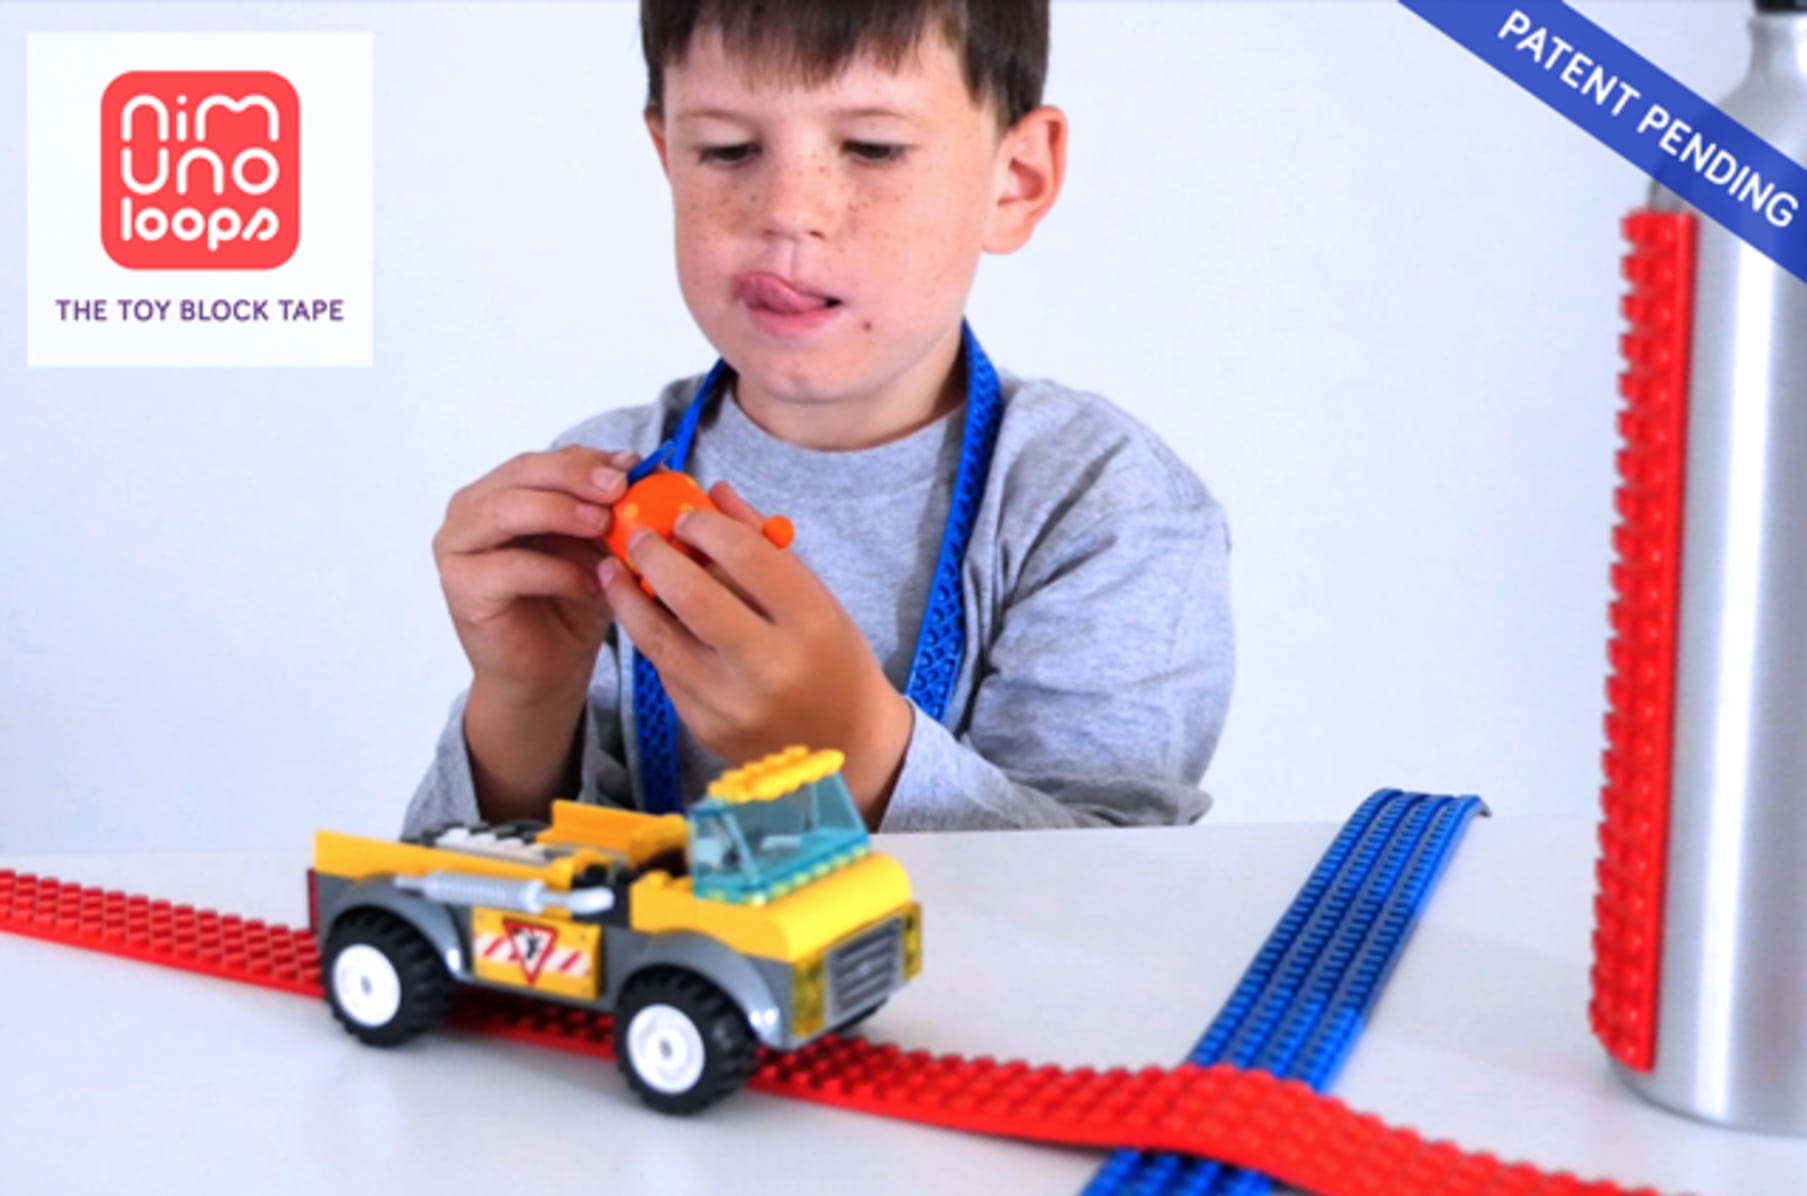 Amazing crowdfunded 'Lego tape' turns any surface into the perfect